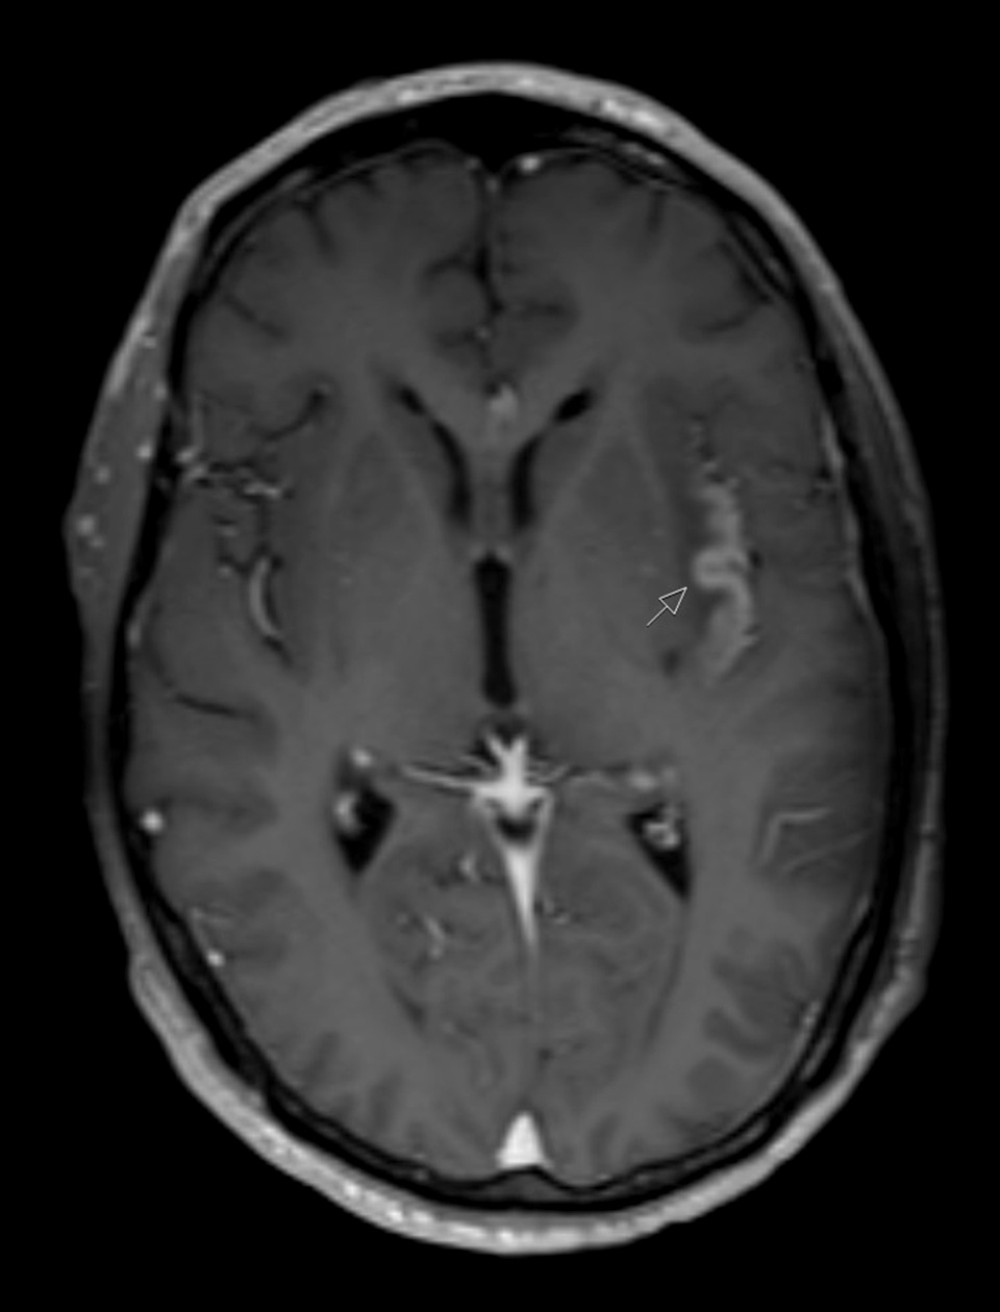 First axial contrast-enhanced T1-weighted magnetic resonance imaging (MRI), showing enhancement along the left insular lobe, particularly of the insular cortex (arrow).